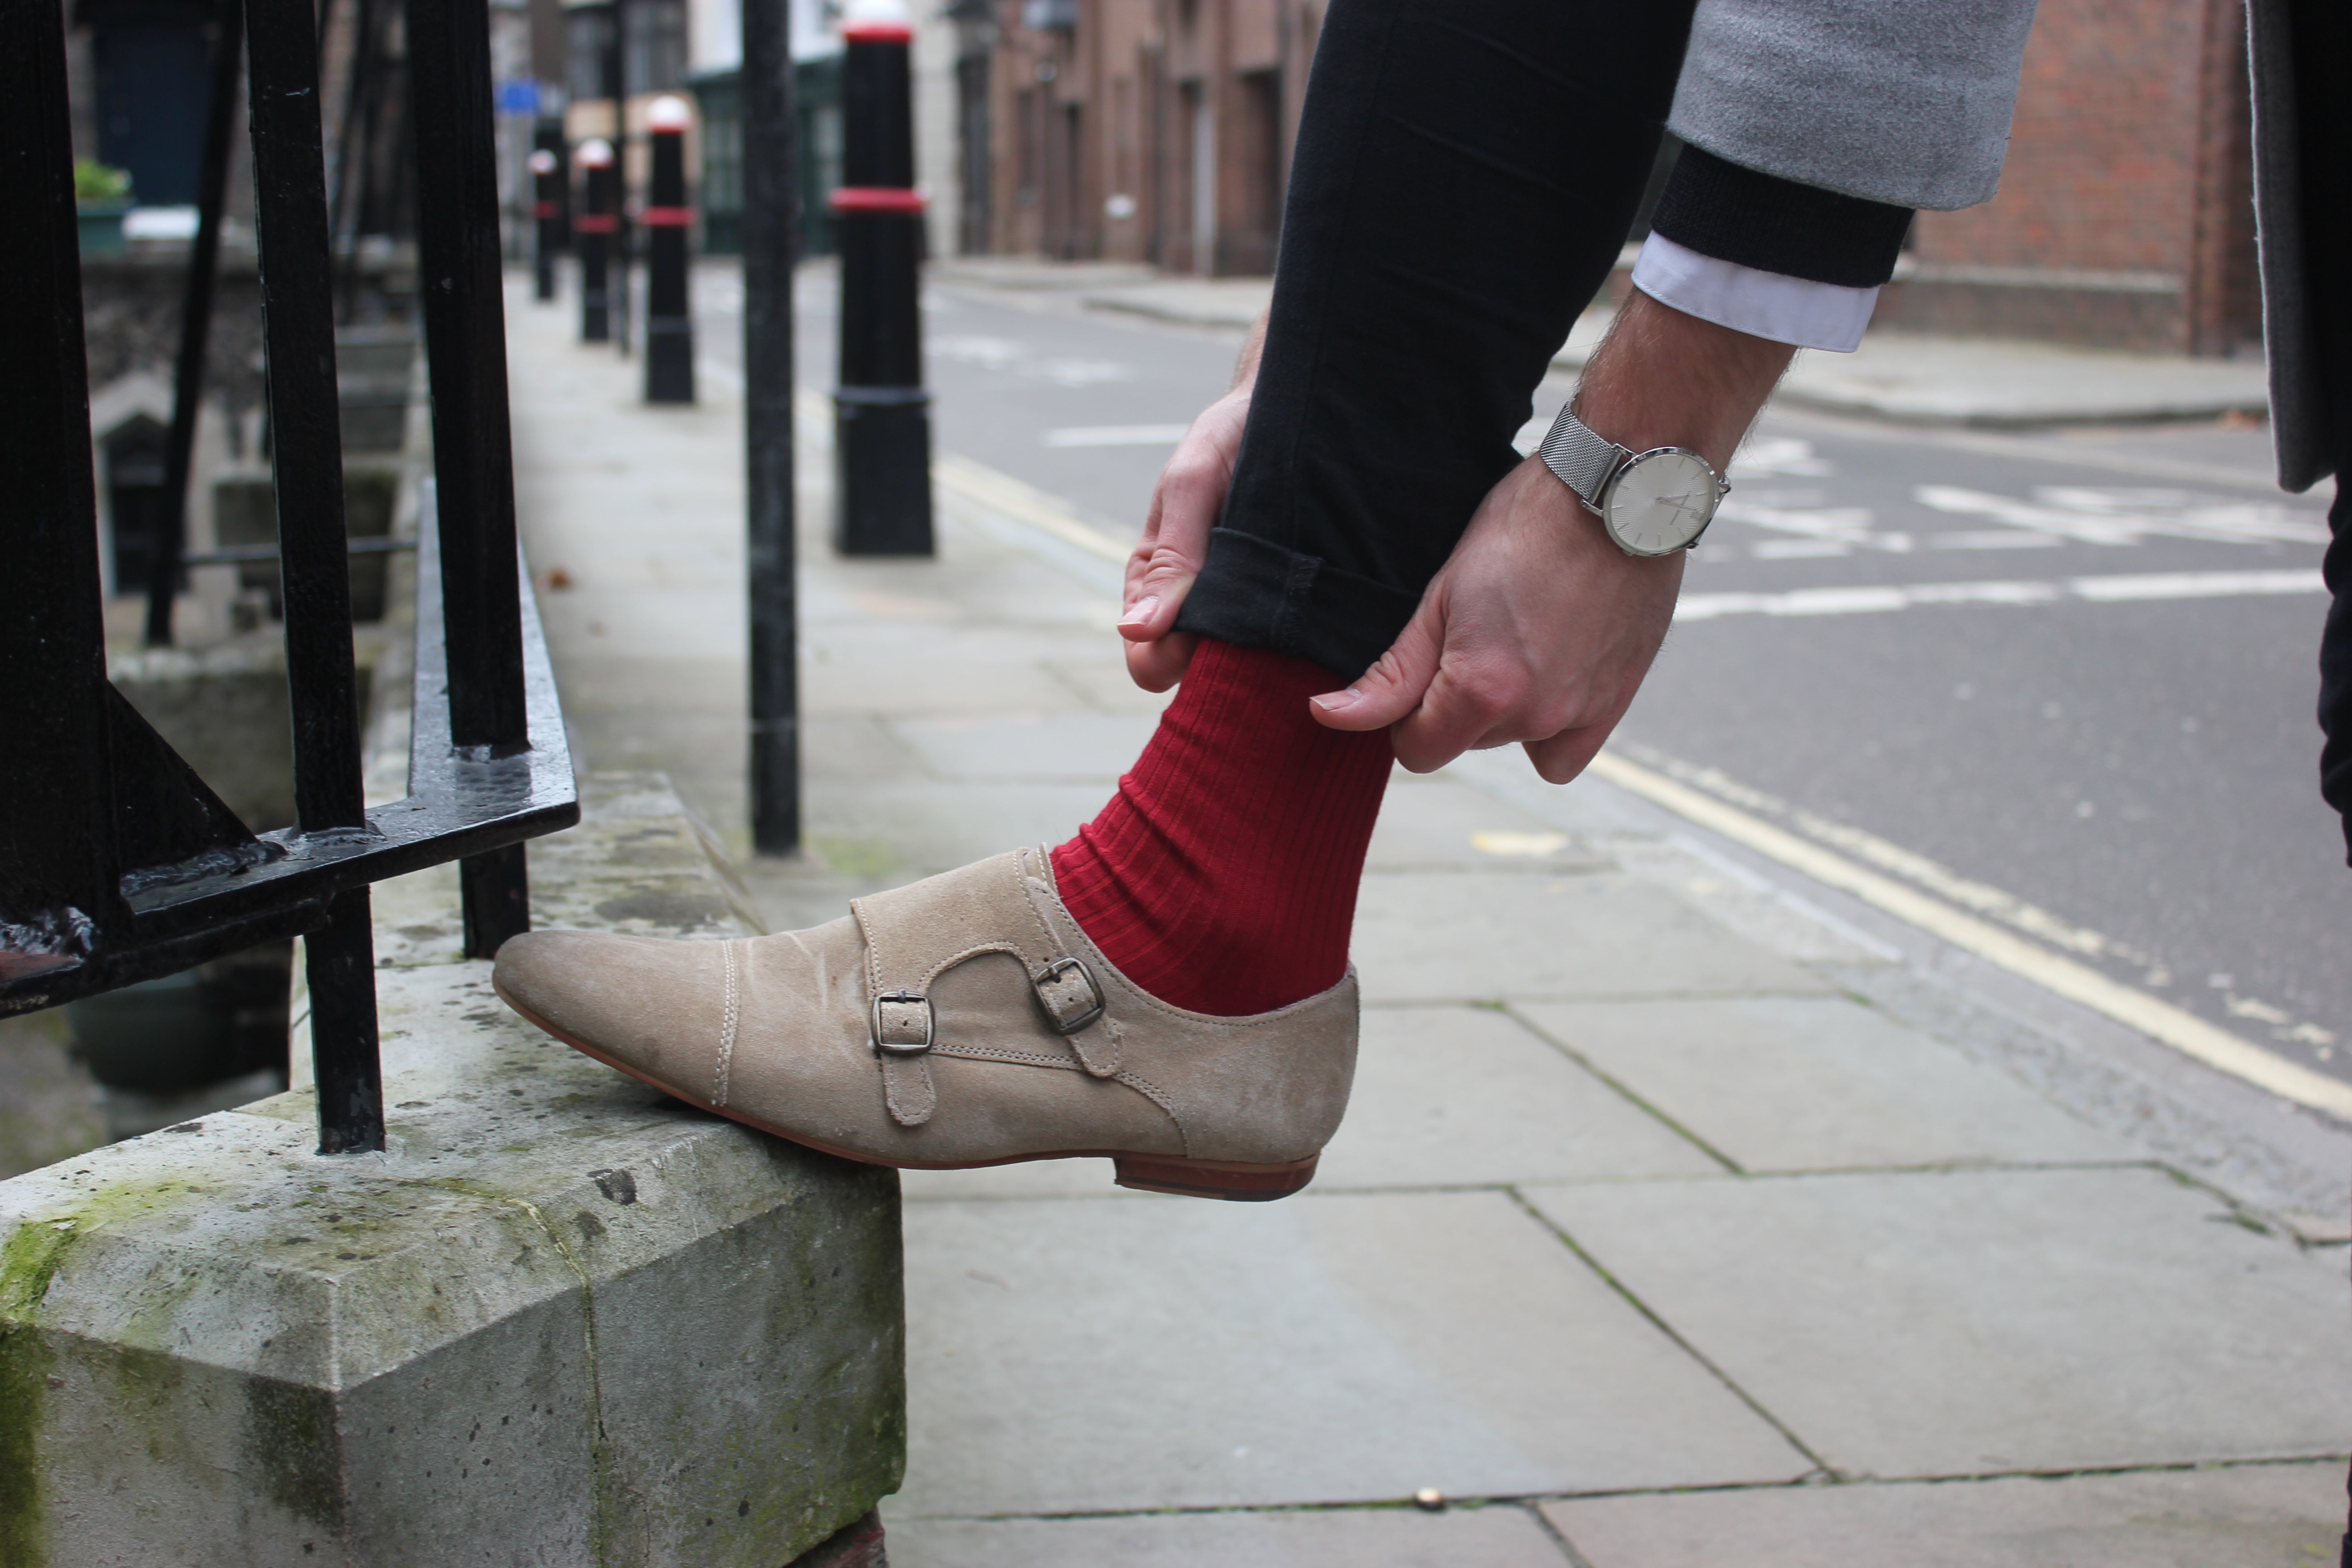 When & Where To Wear Red Socks